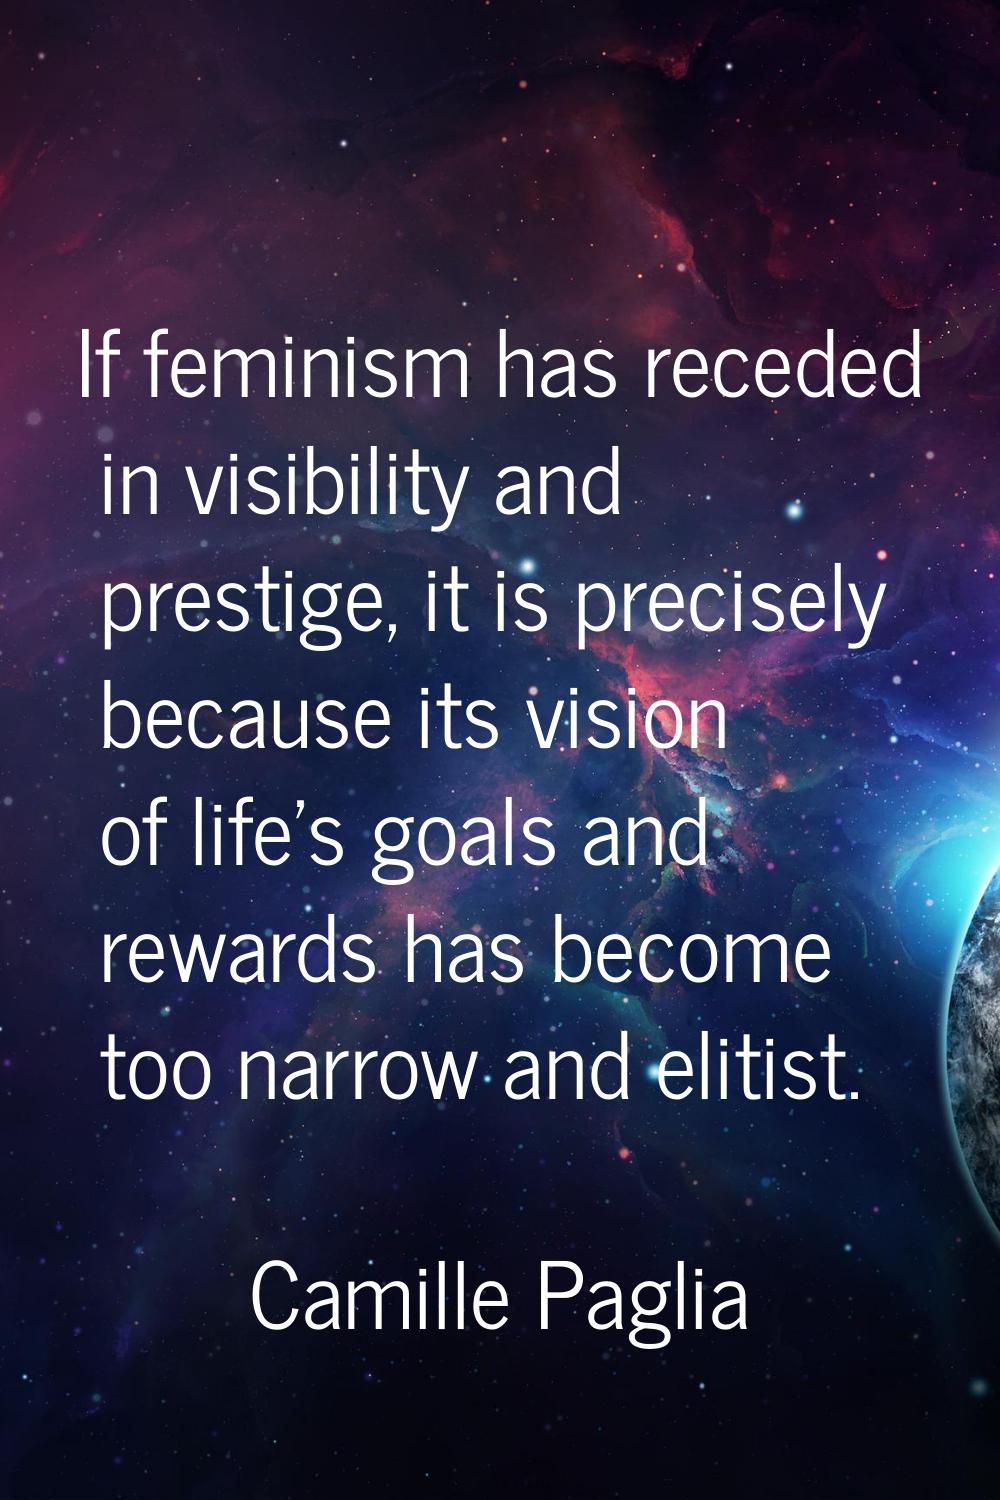 If feminism has receded in visibility and prestige, it is precisely because its vision of life's go